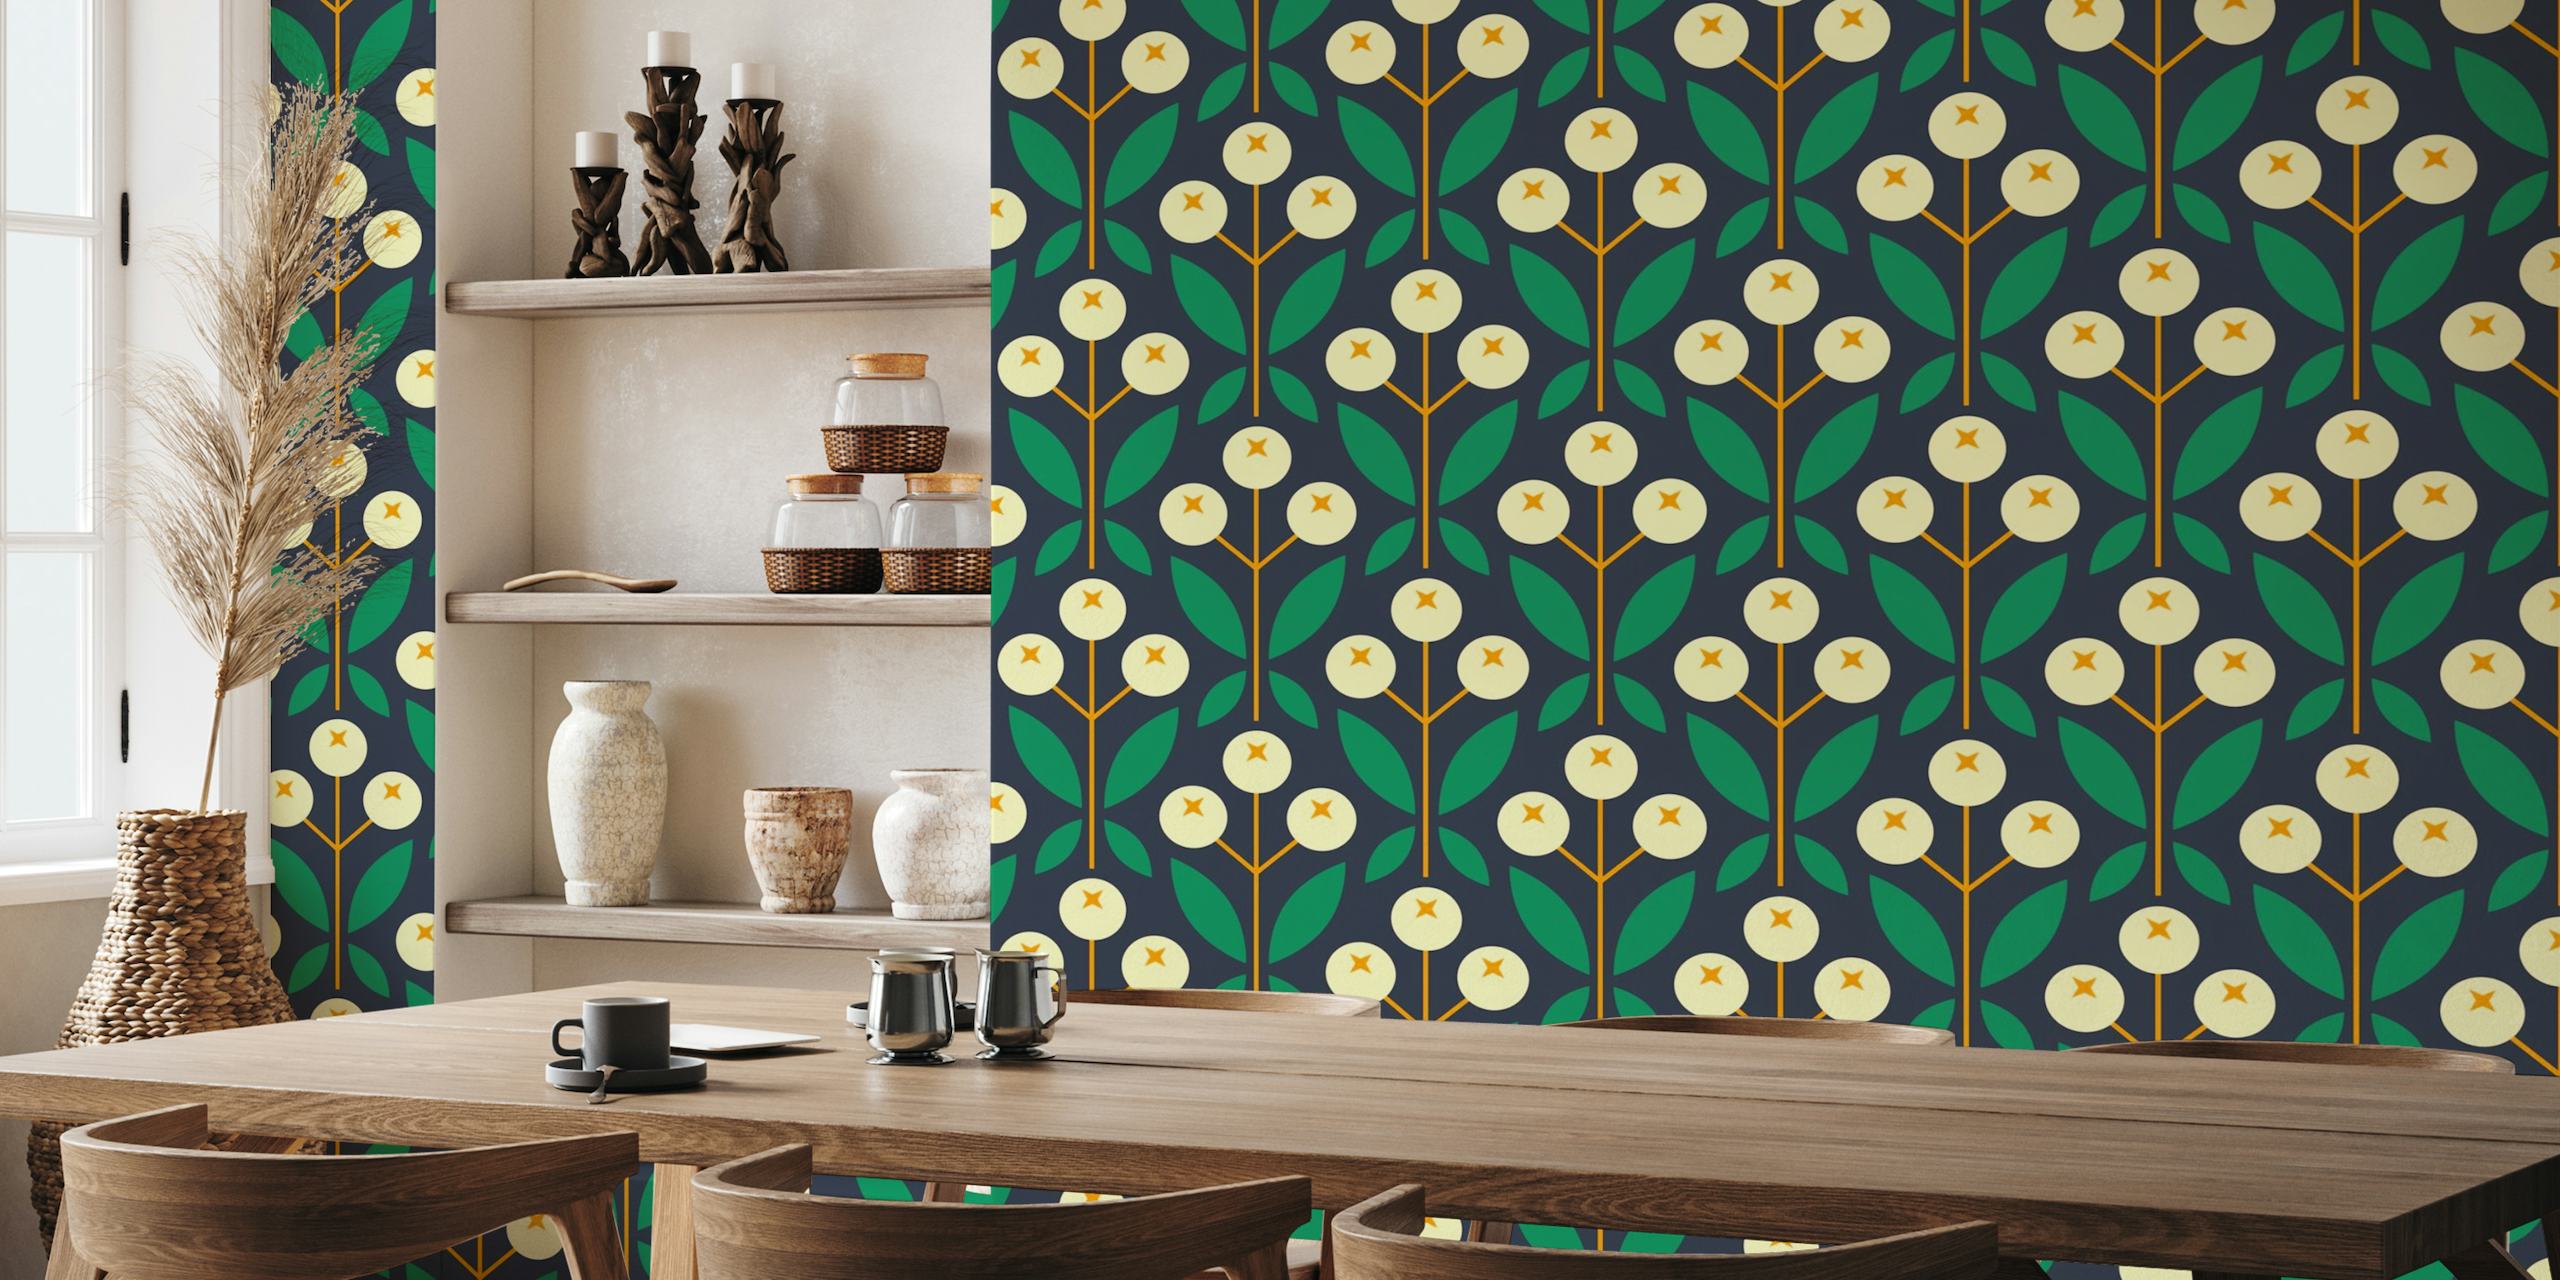 Geometric pattern wall mural with berries and leaves in navy blue, green, and mustard yellow